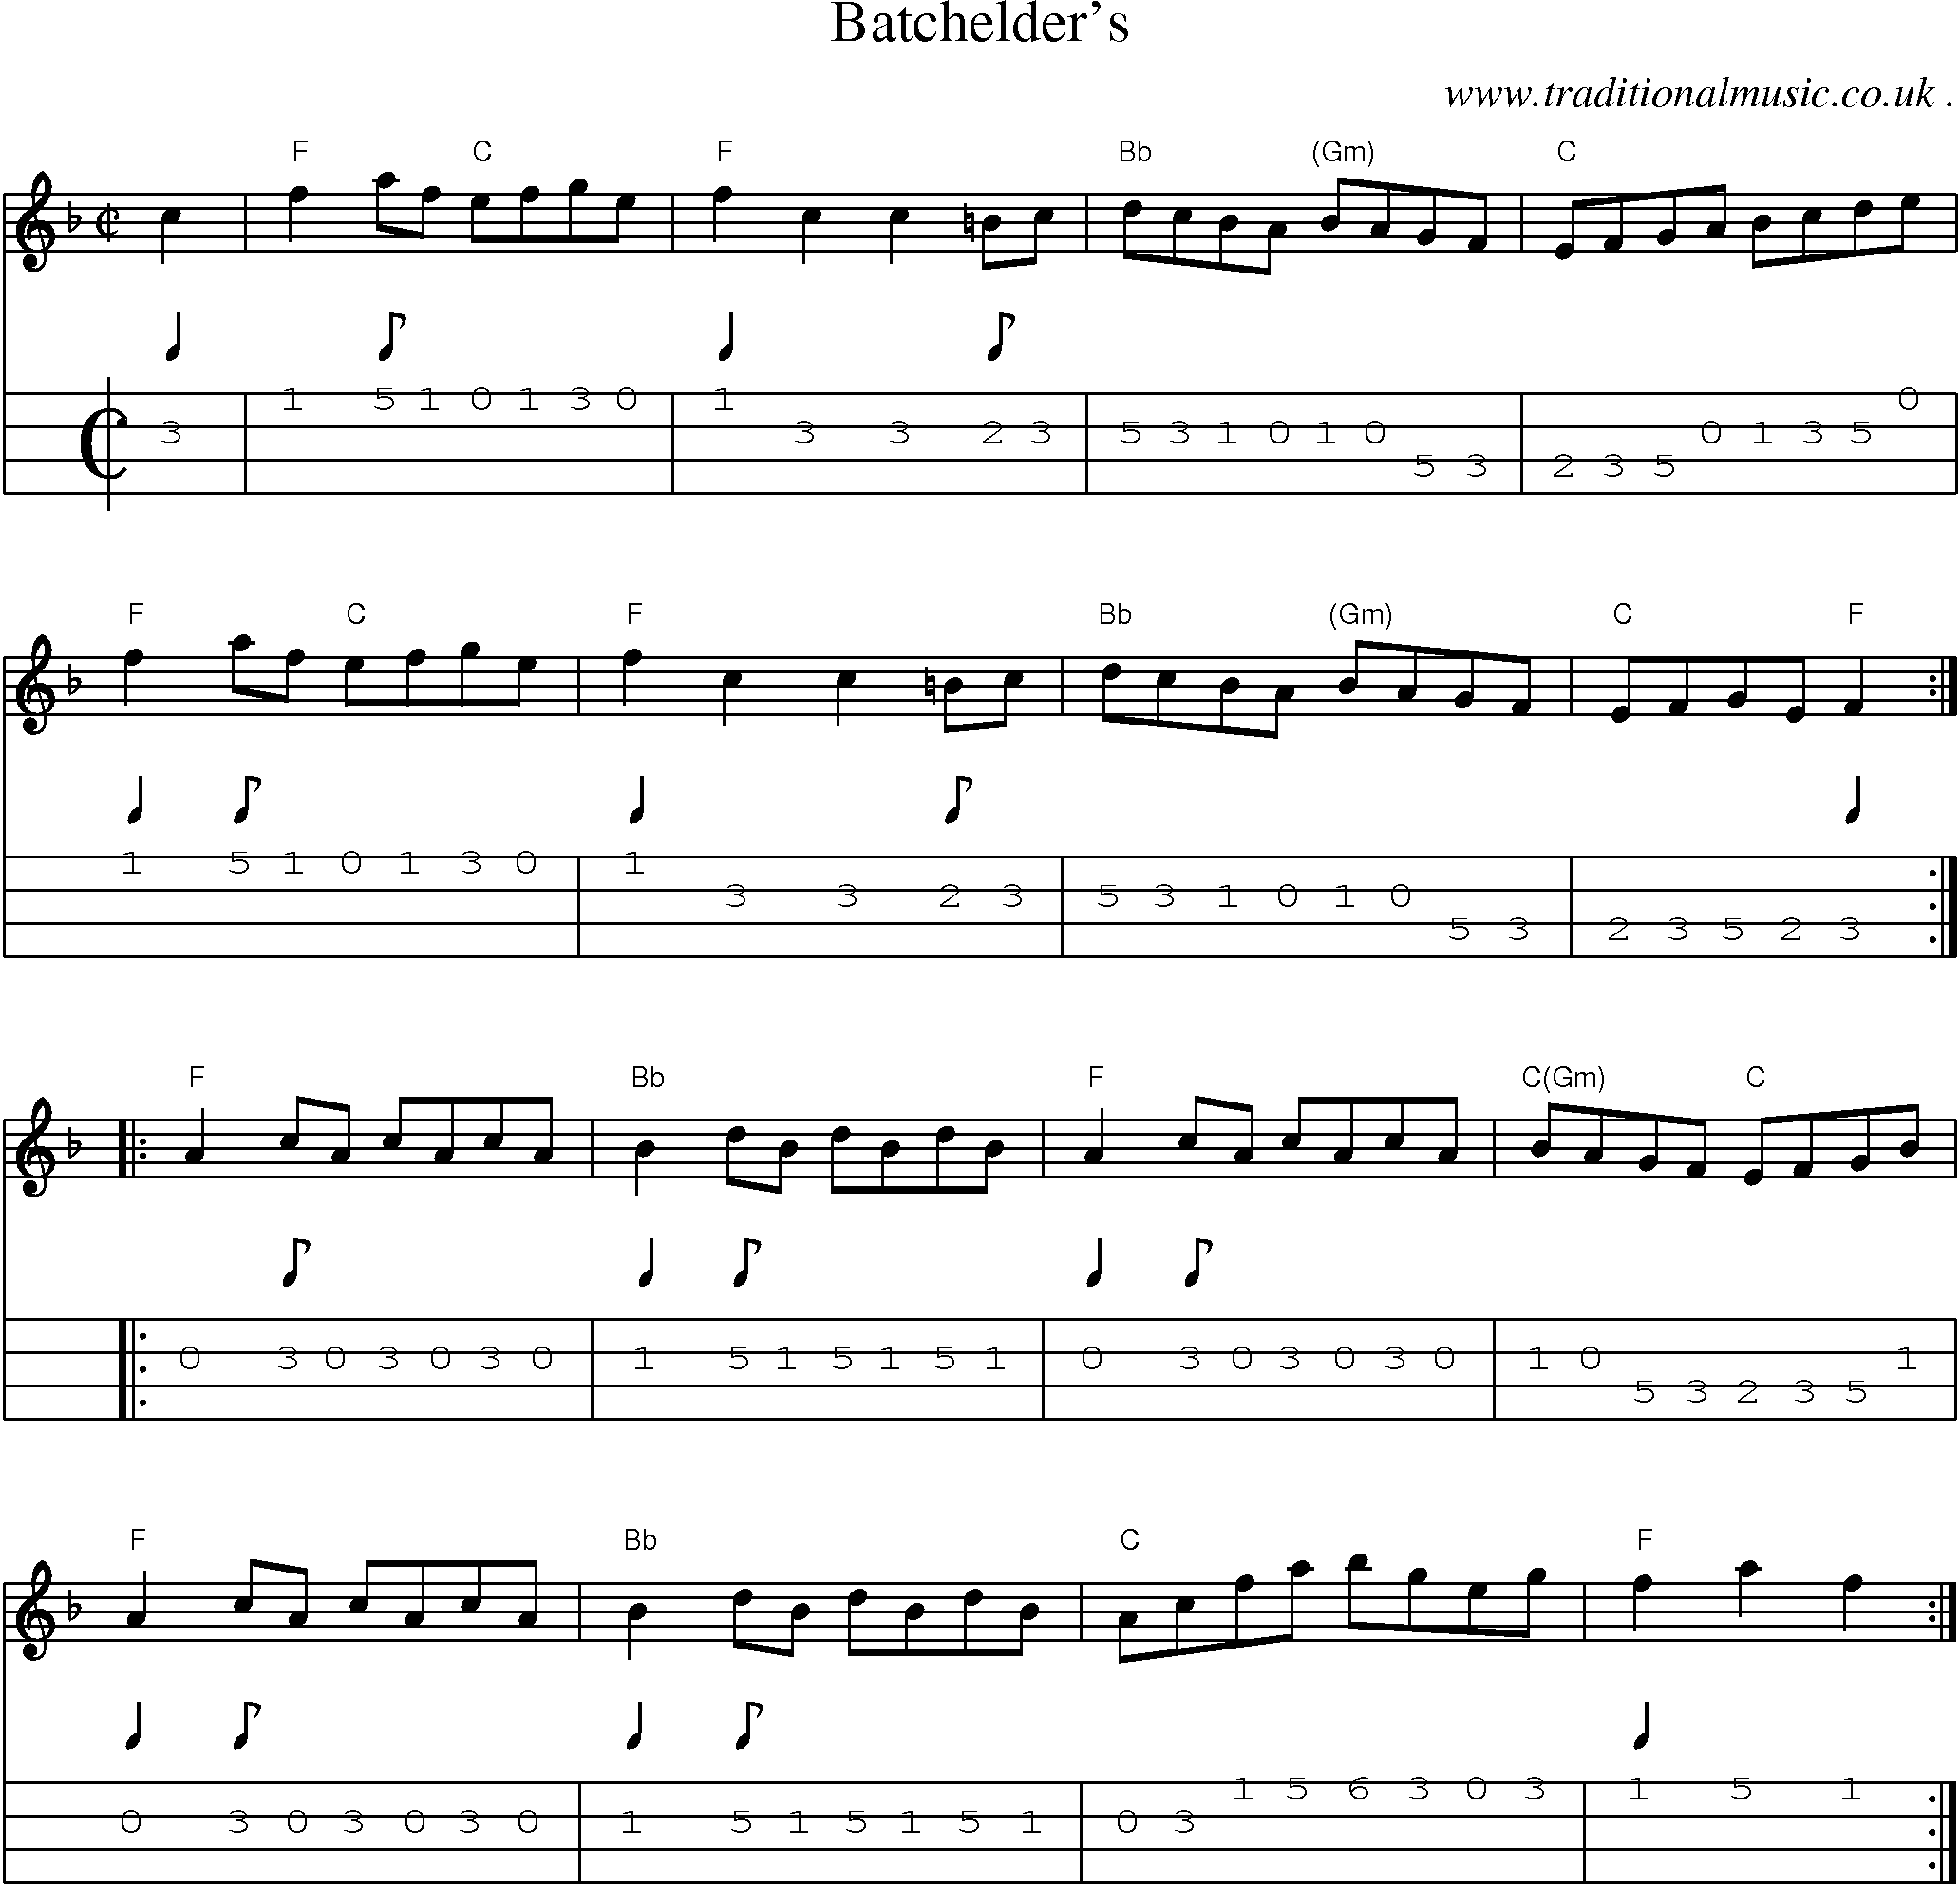 Music Score and Guitar Tabs for Batchelders